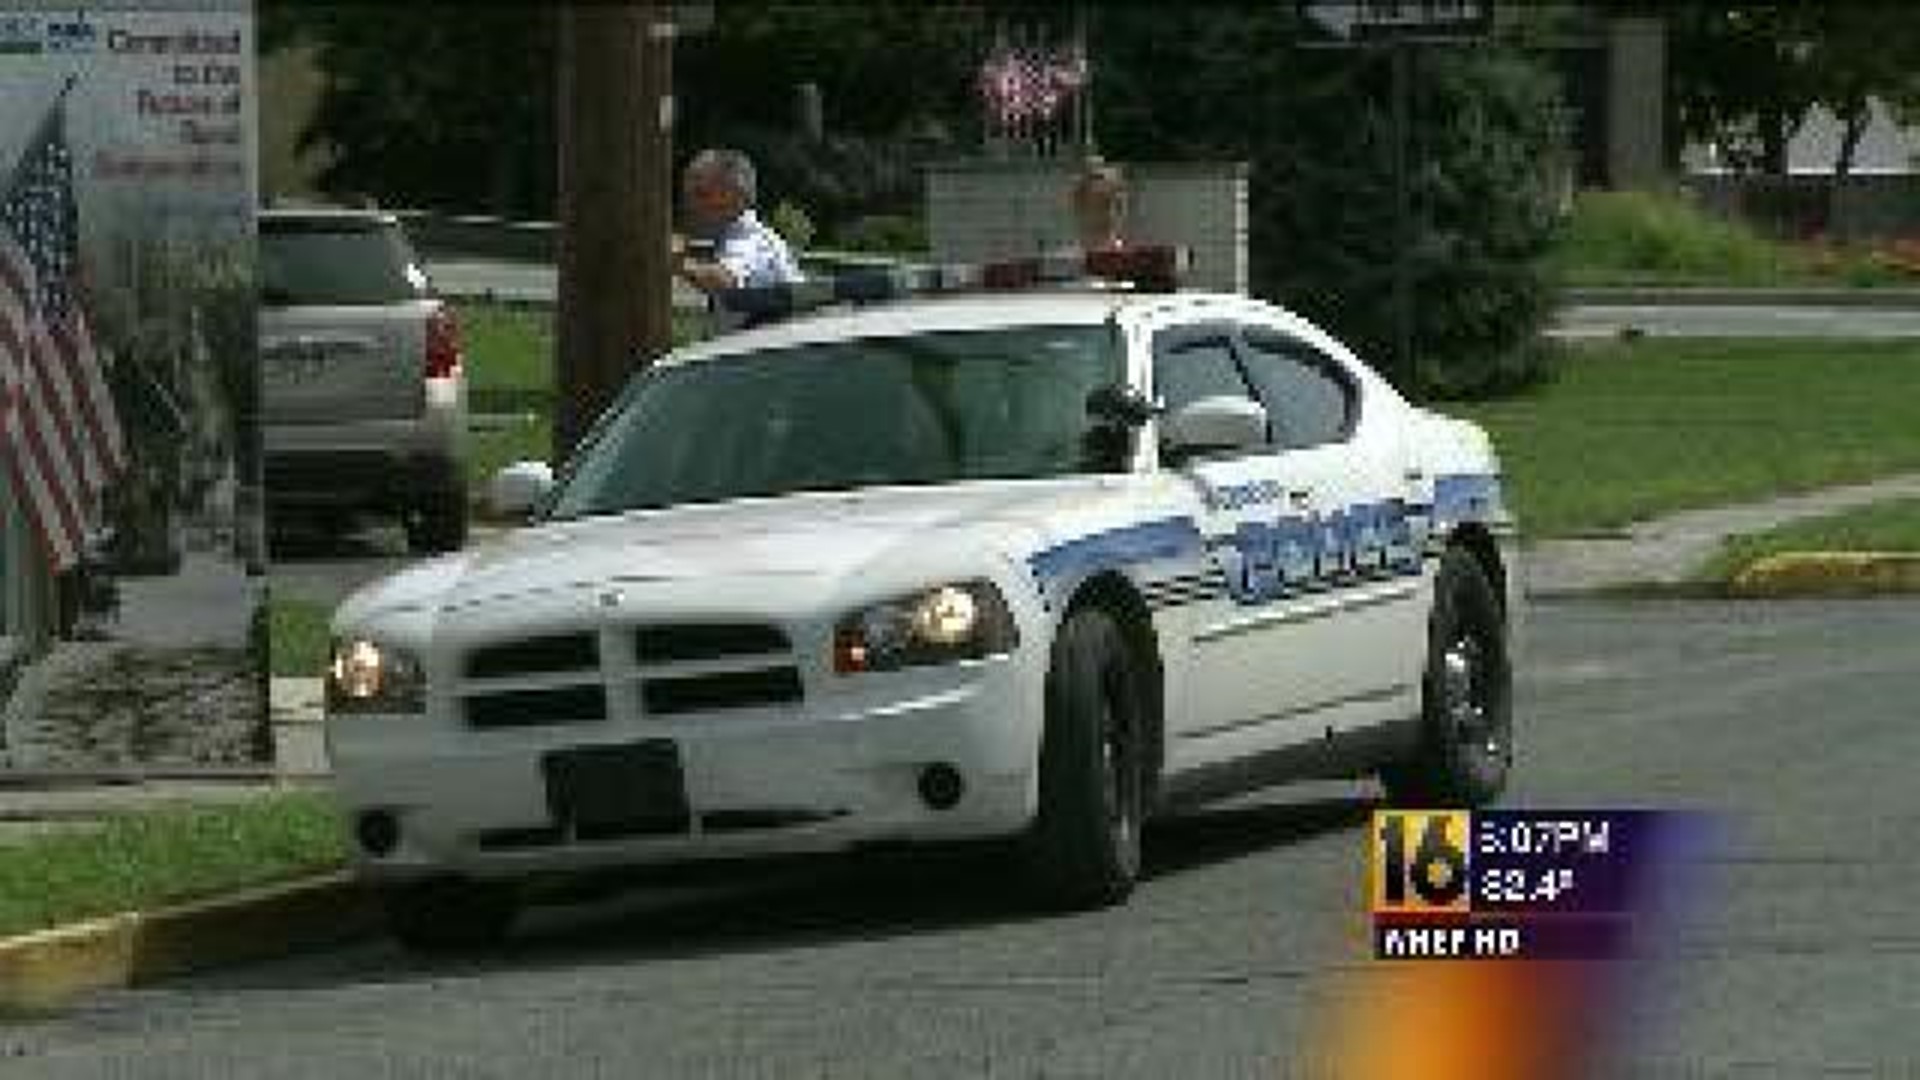 Grant Money Helps Pay for Police Cruiser